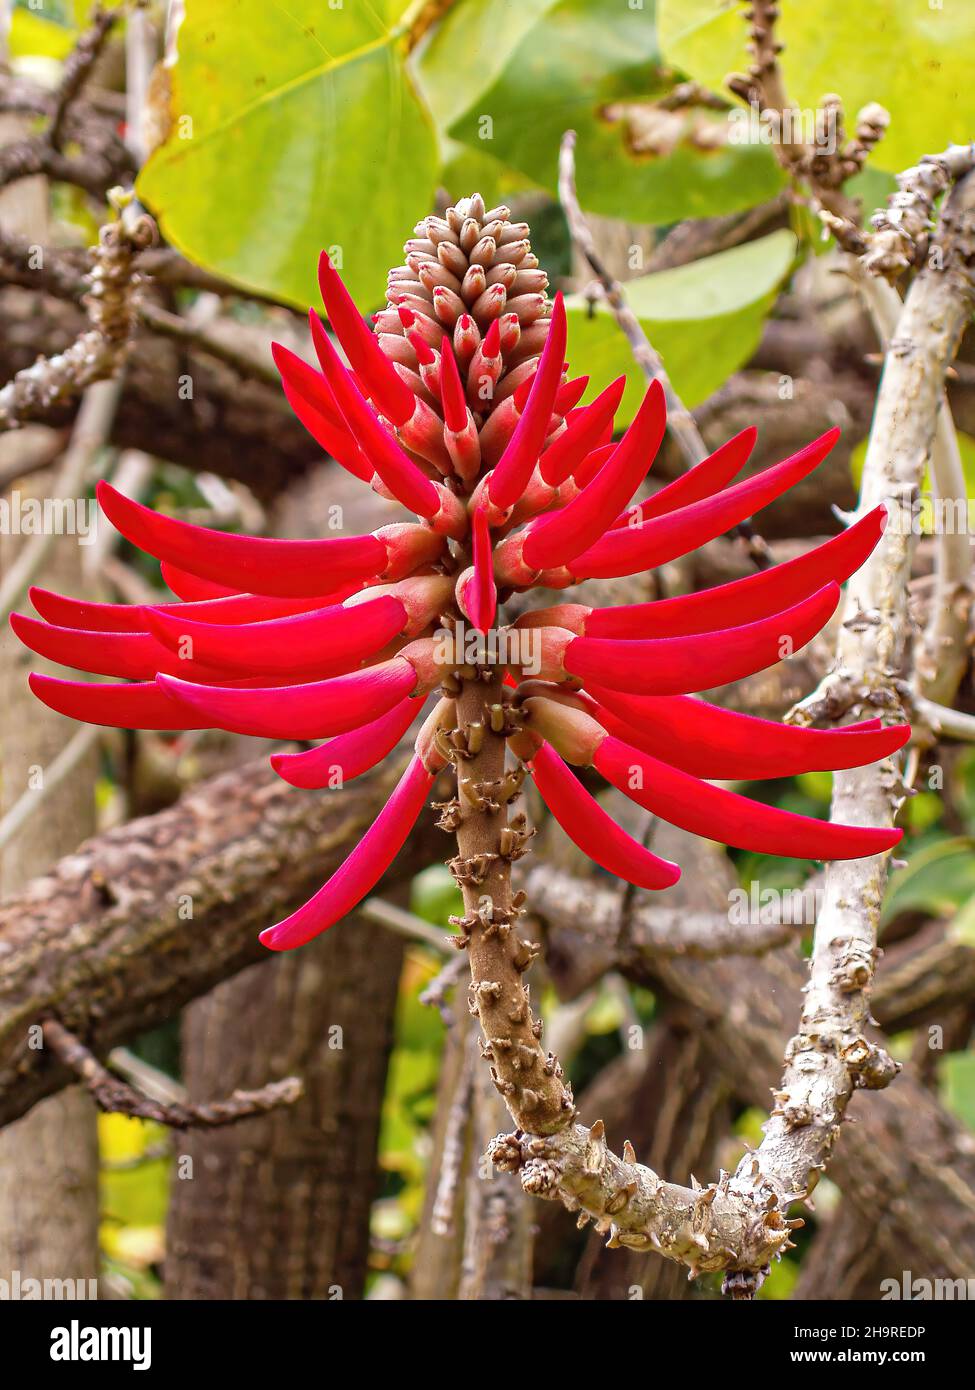 Closeup shot of Erythrina coralloides on a sunny day Stock Photo